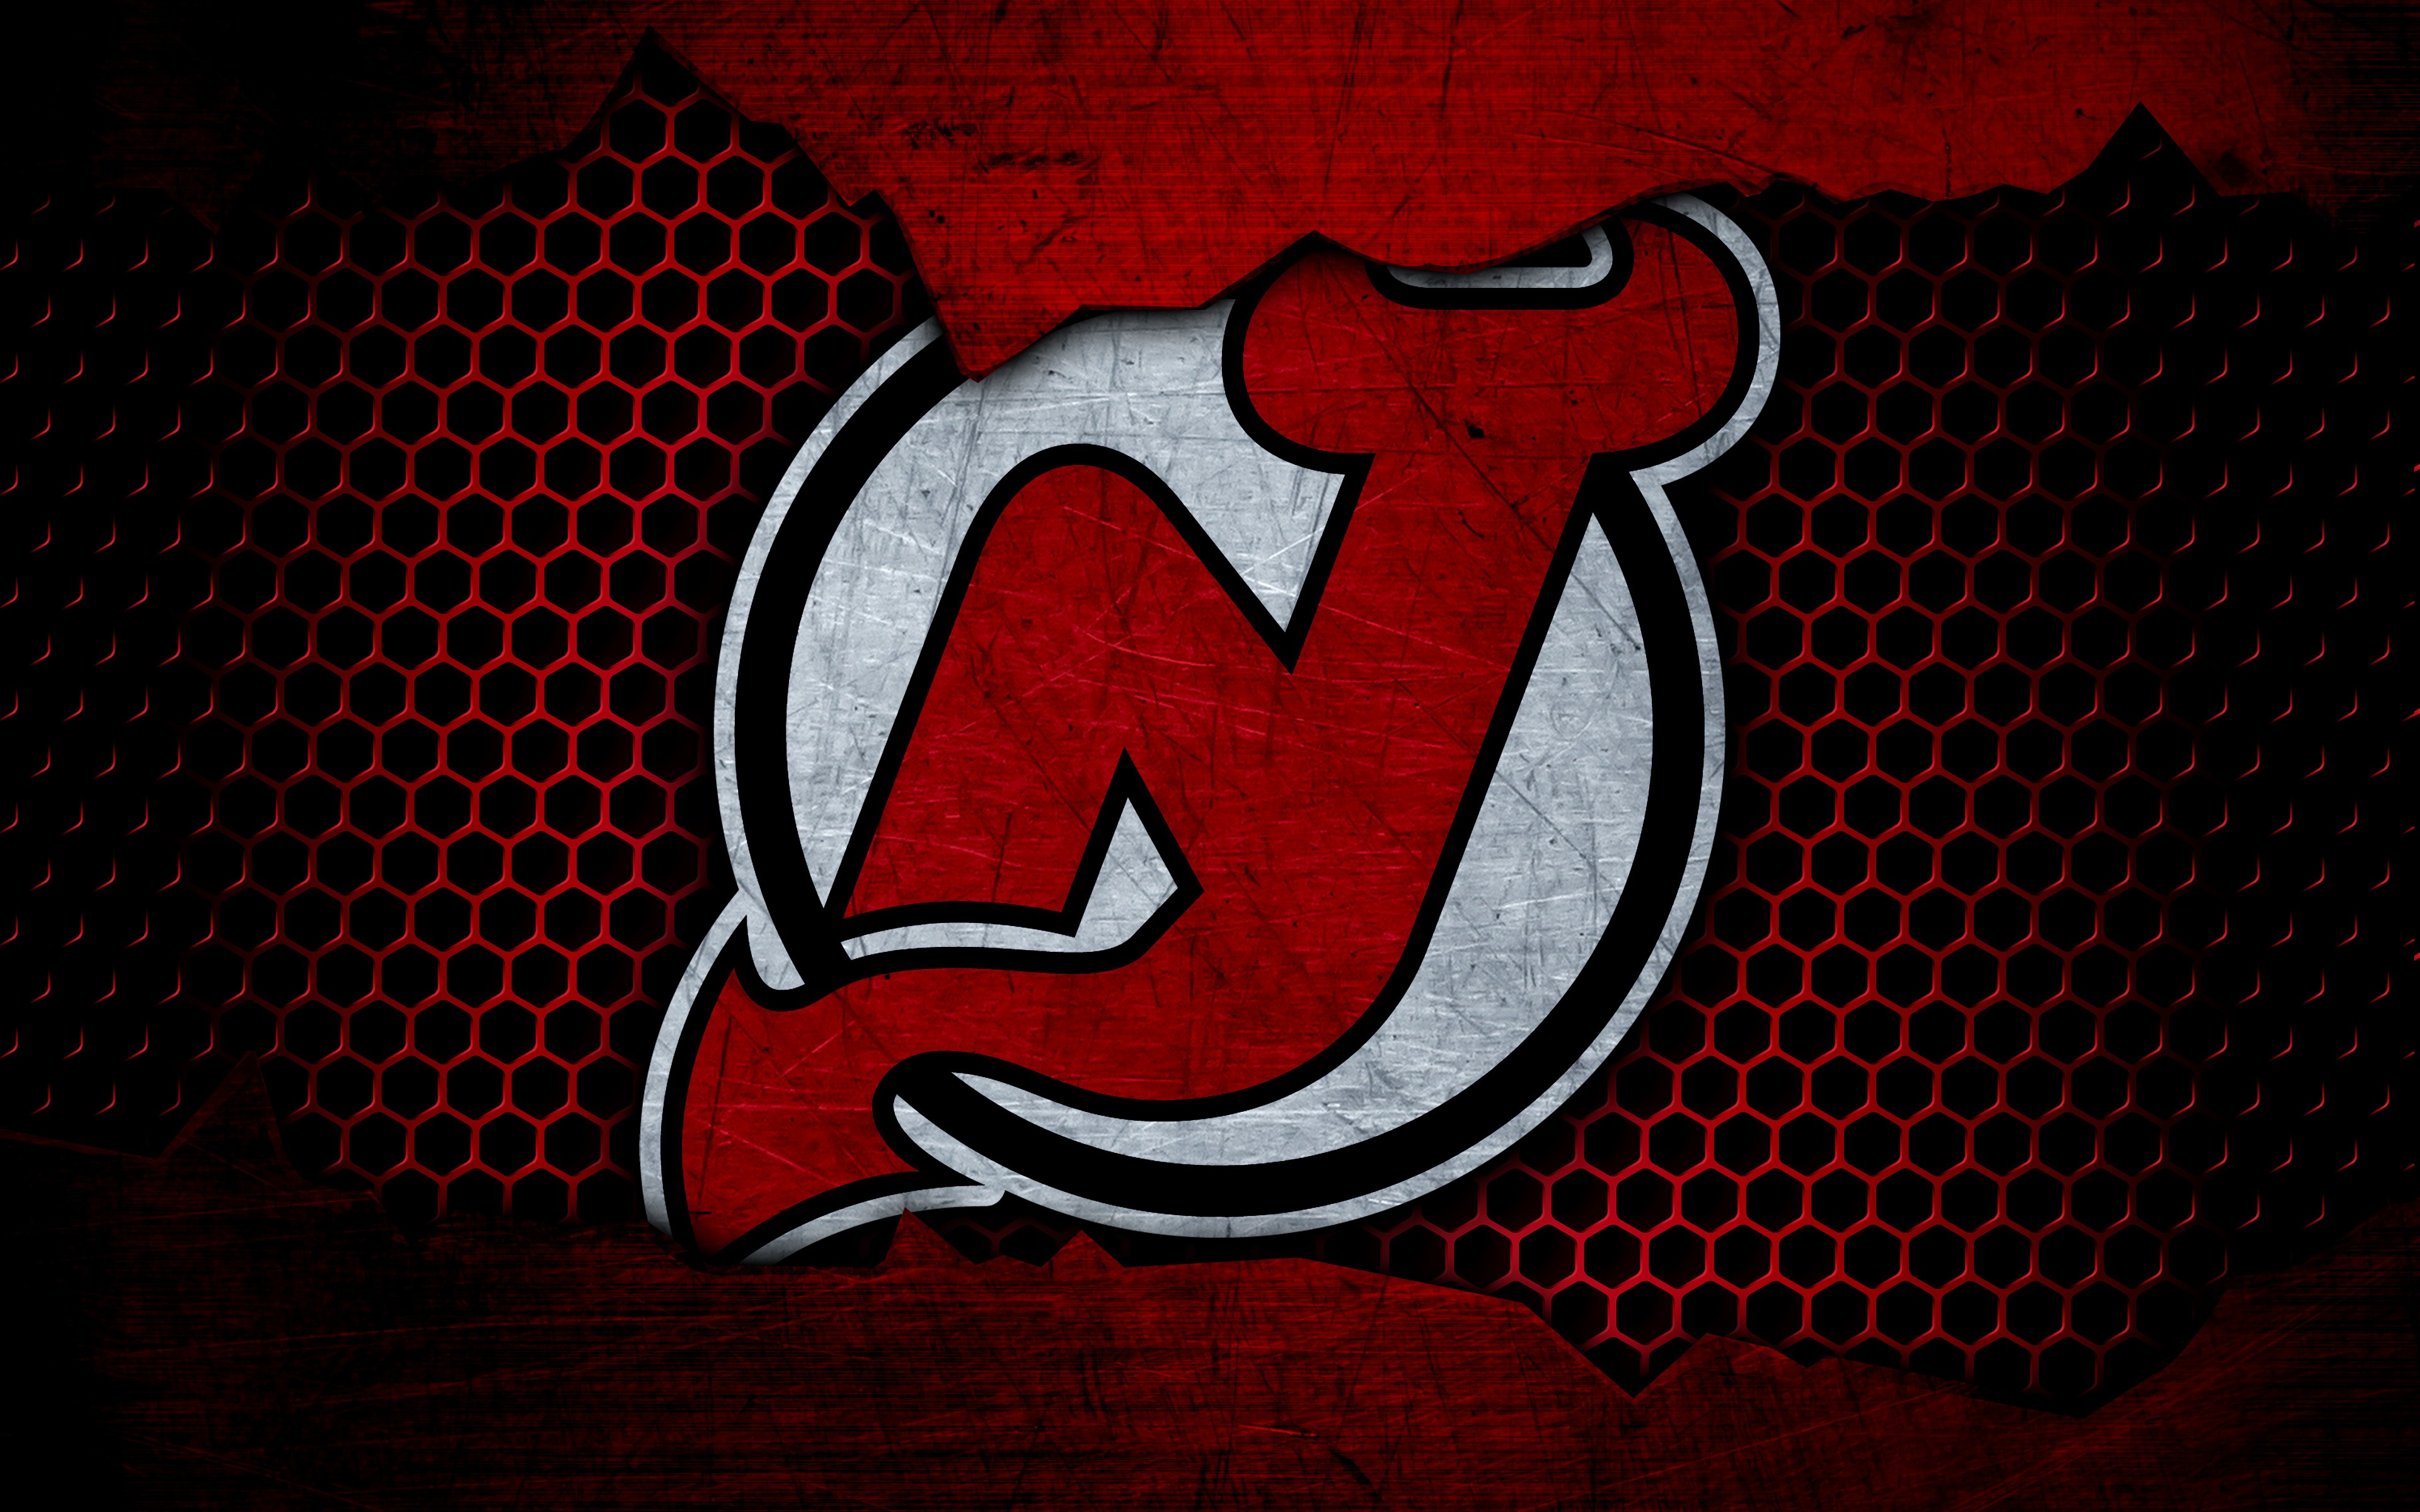 New jersey devils. Нью Девилс джерси Девилз. НХЛ – Нью-джерси Девилз. Нью джерси Девилз лого. НХЛ Нью-джерси Девилз эмблема.